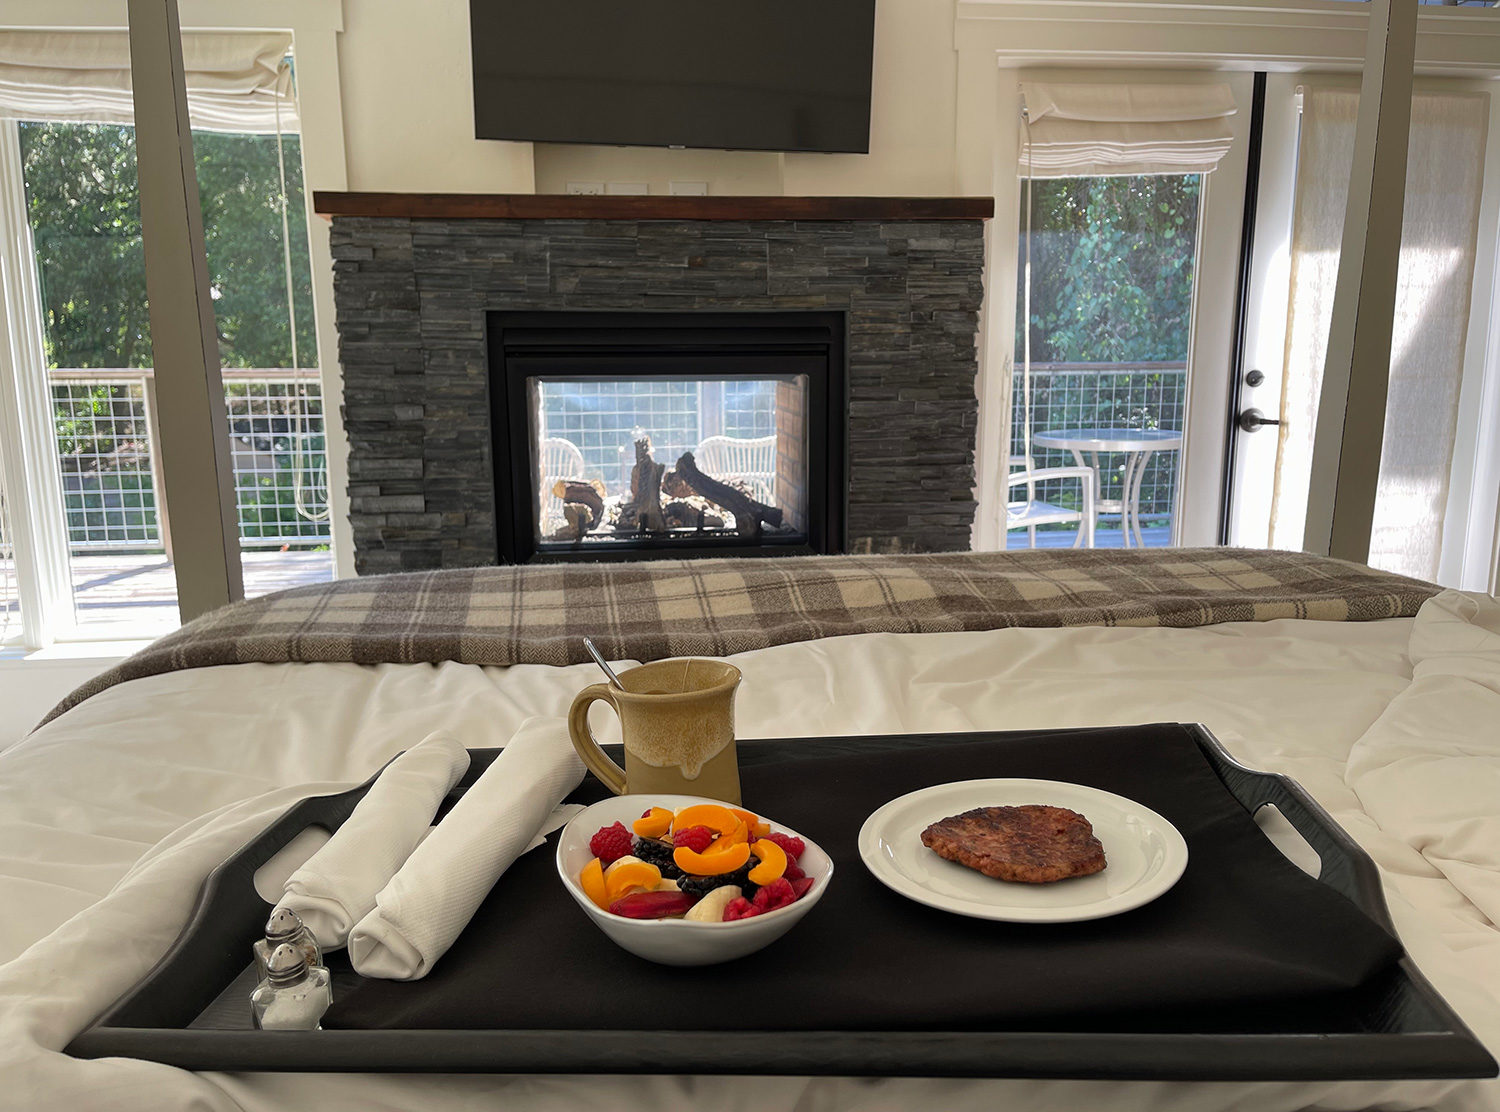 Farmhouse Inn A morning snack and as much time as possible in this cozy bed. Also, this two-way fireplace is everything!